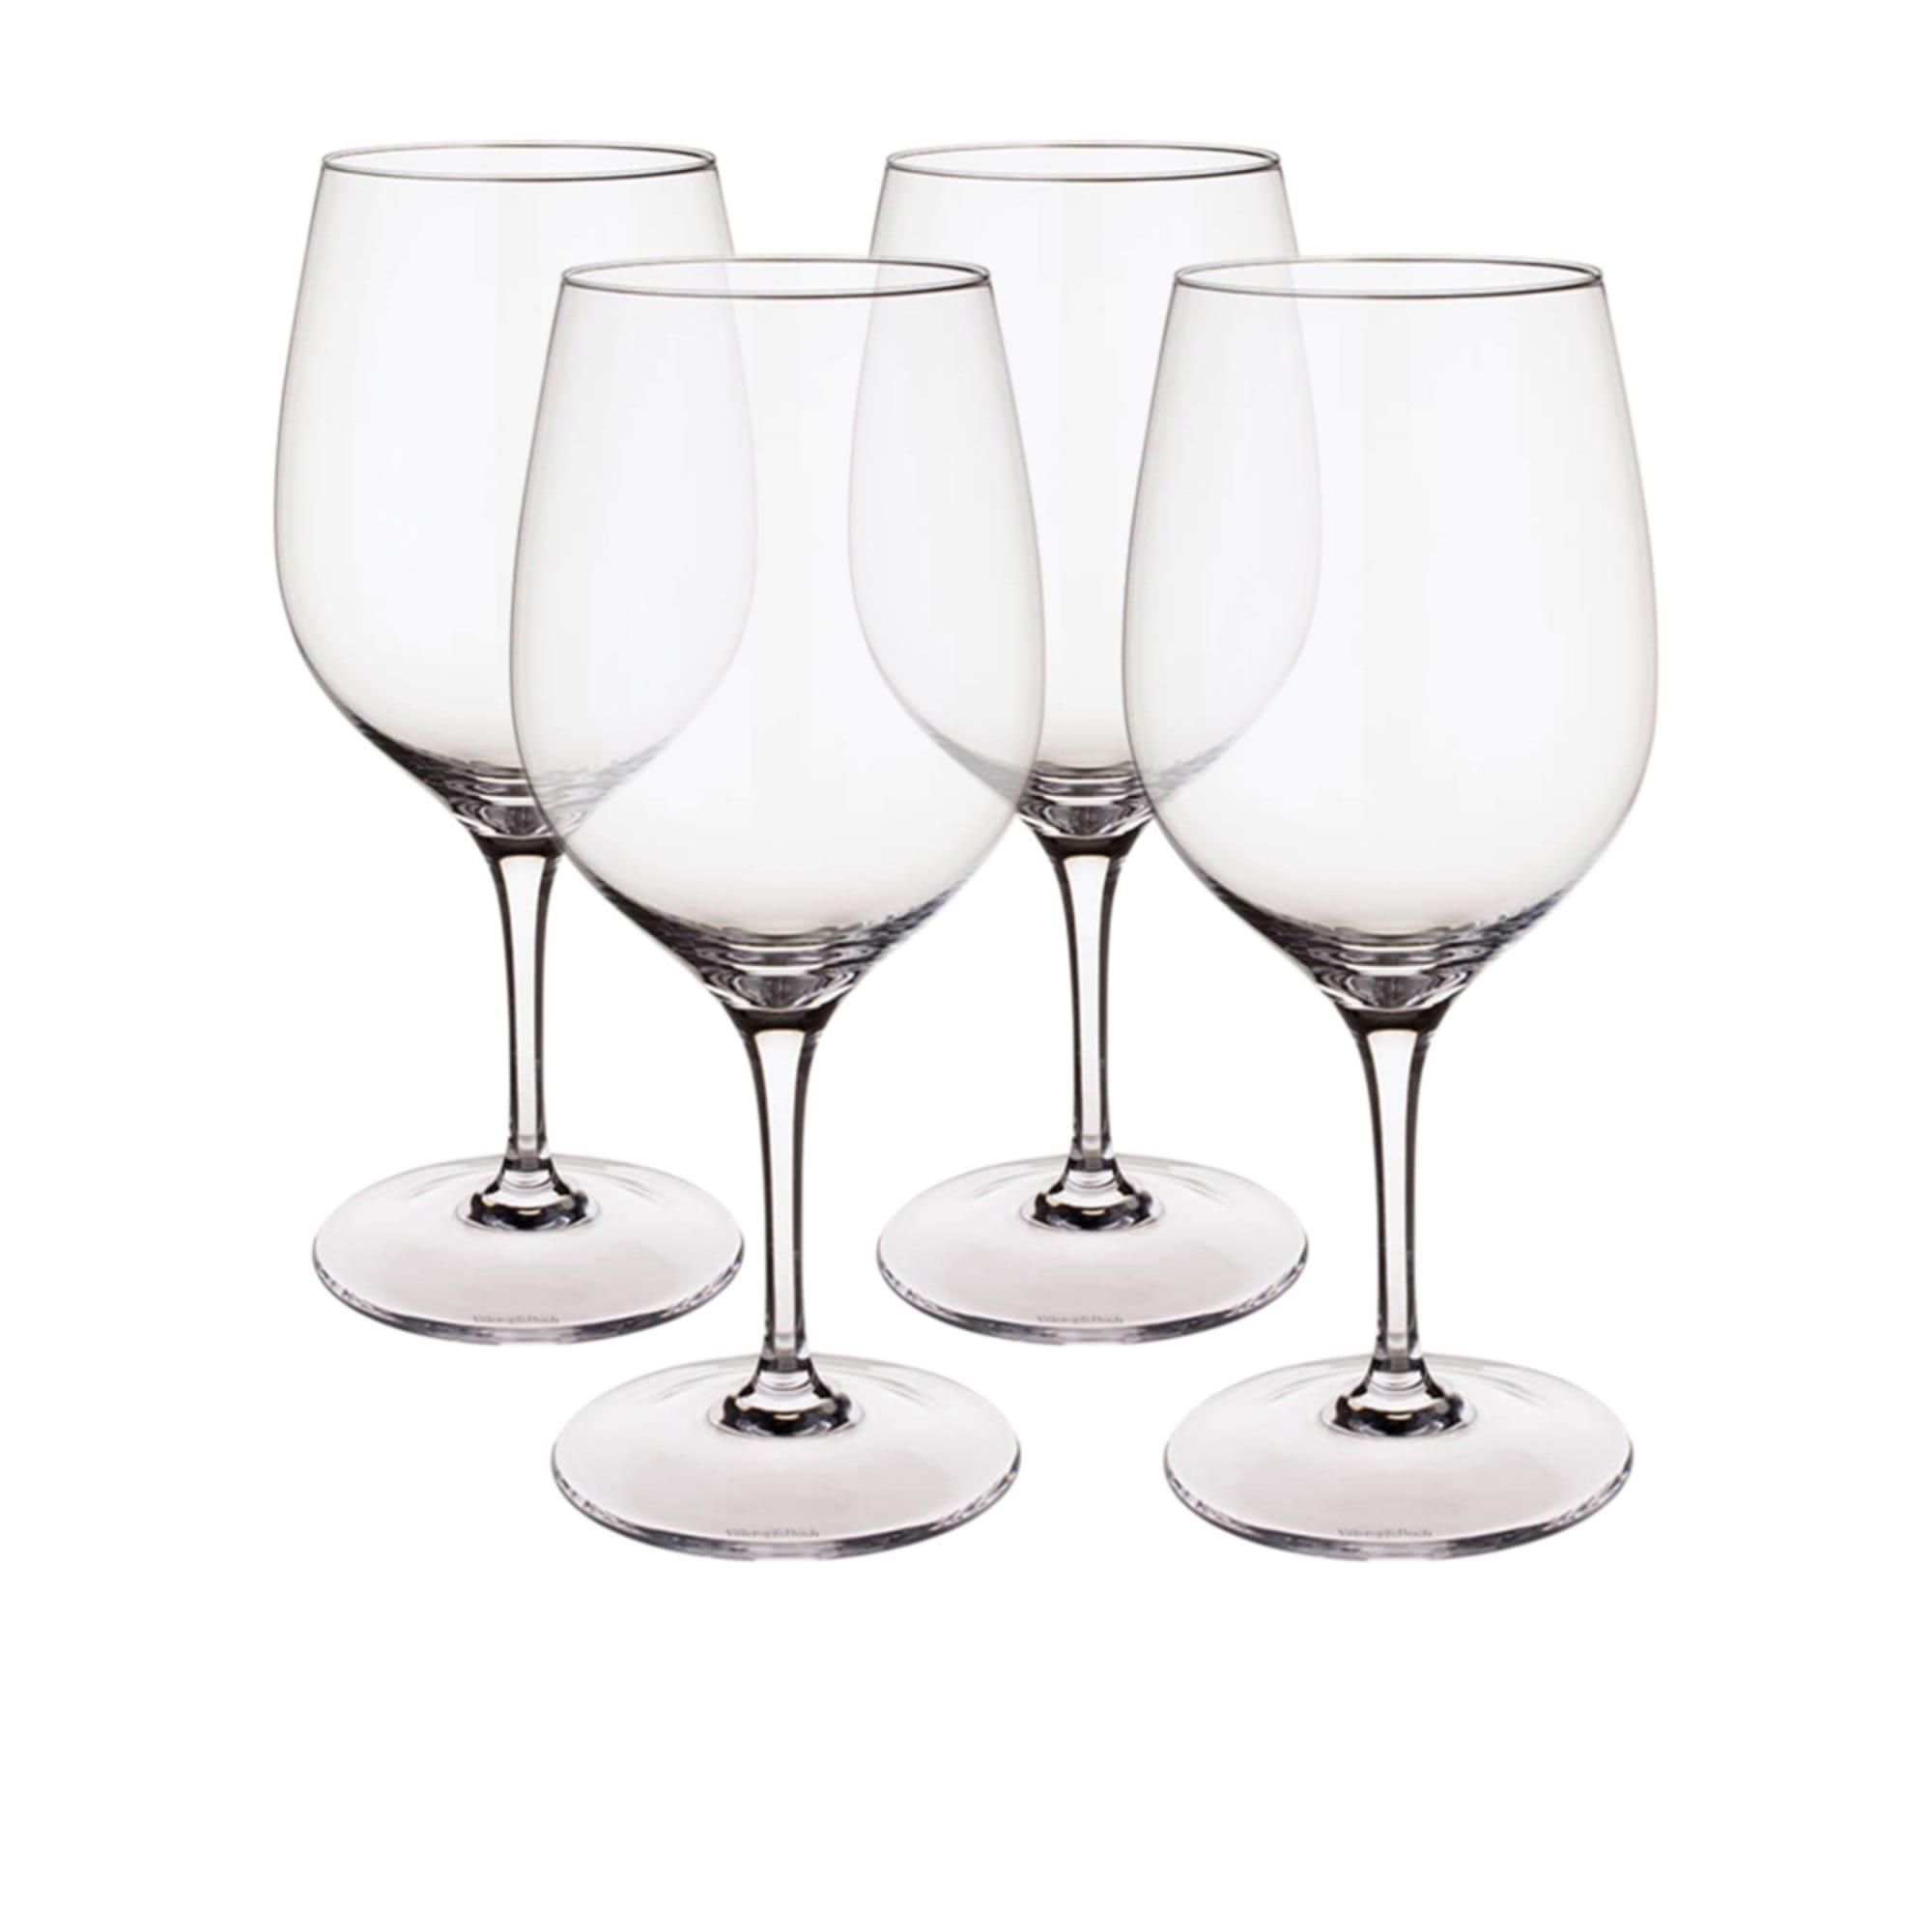 Villeroy & Boch Entree Daily Basics Red Wine Glass 200ml Set of 4 Image 1